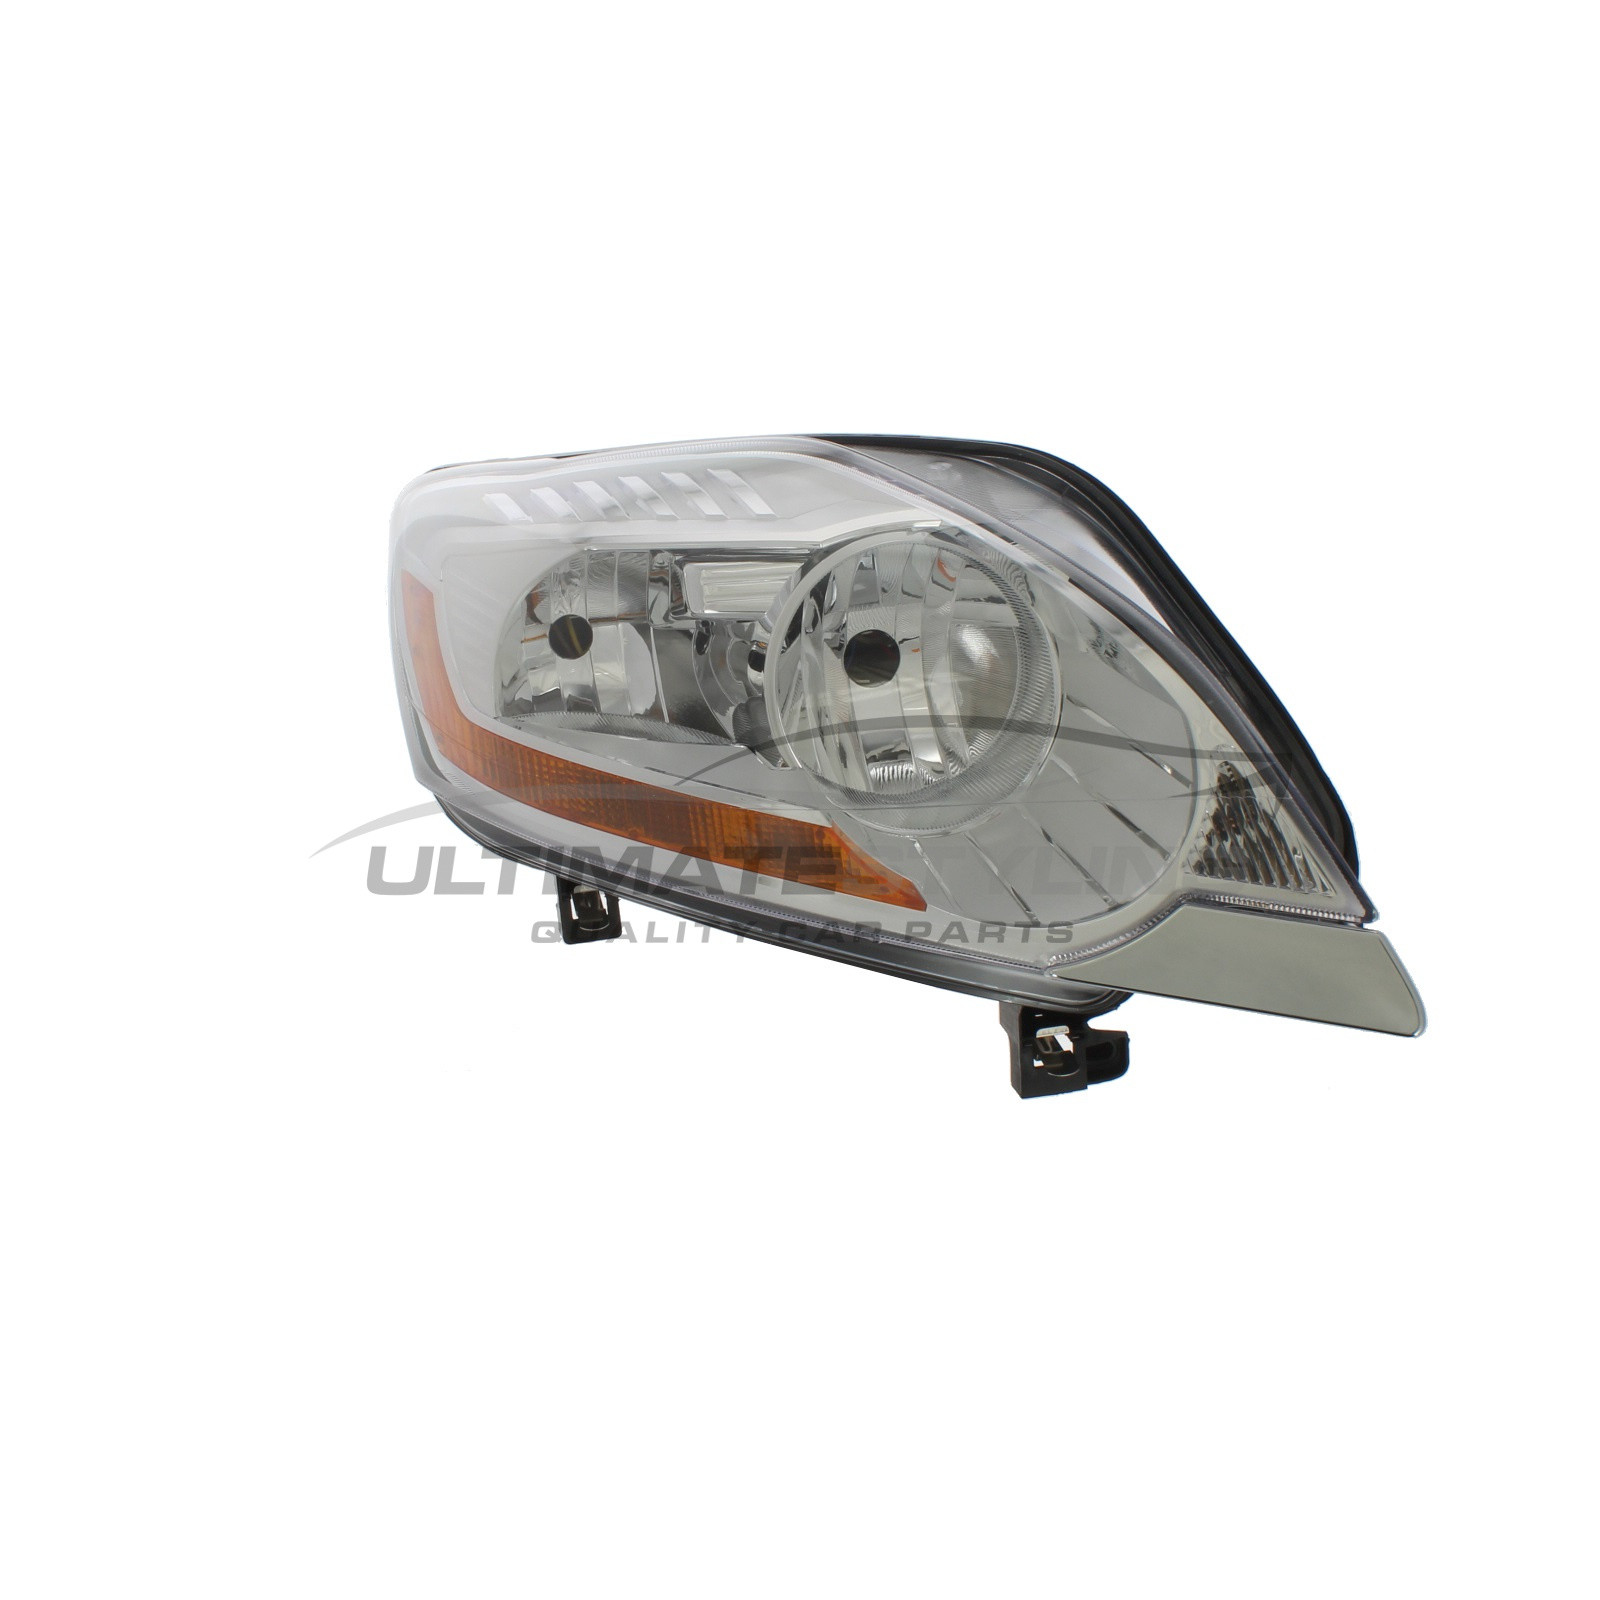 Ford Kuga 2008-2013 Halogen, Electric With Motor, Chrome Headlight / Headlamp Including Amber Indicator Drivers Side (RH)